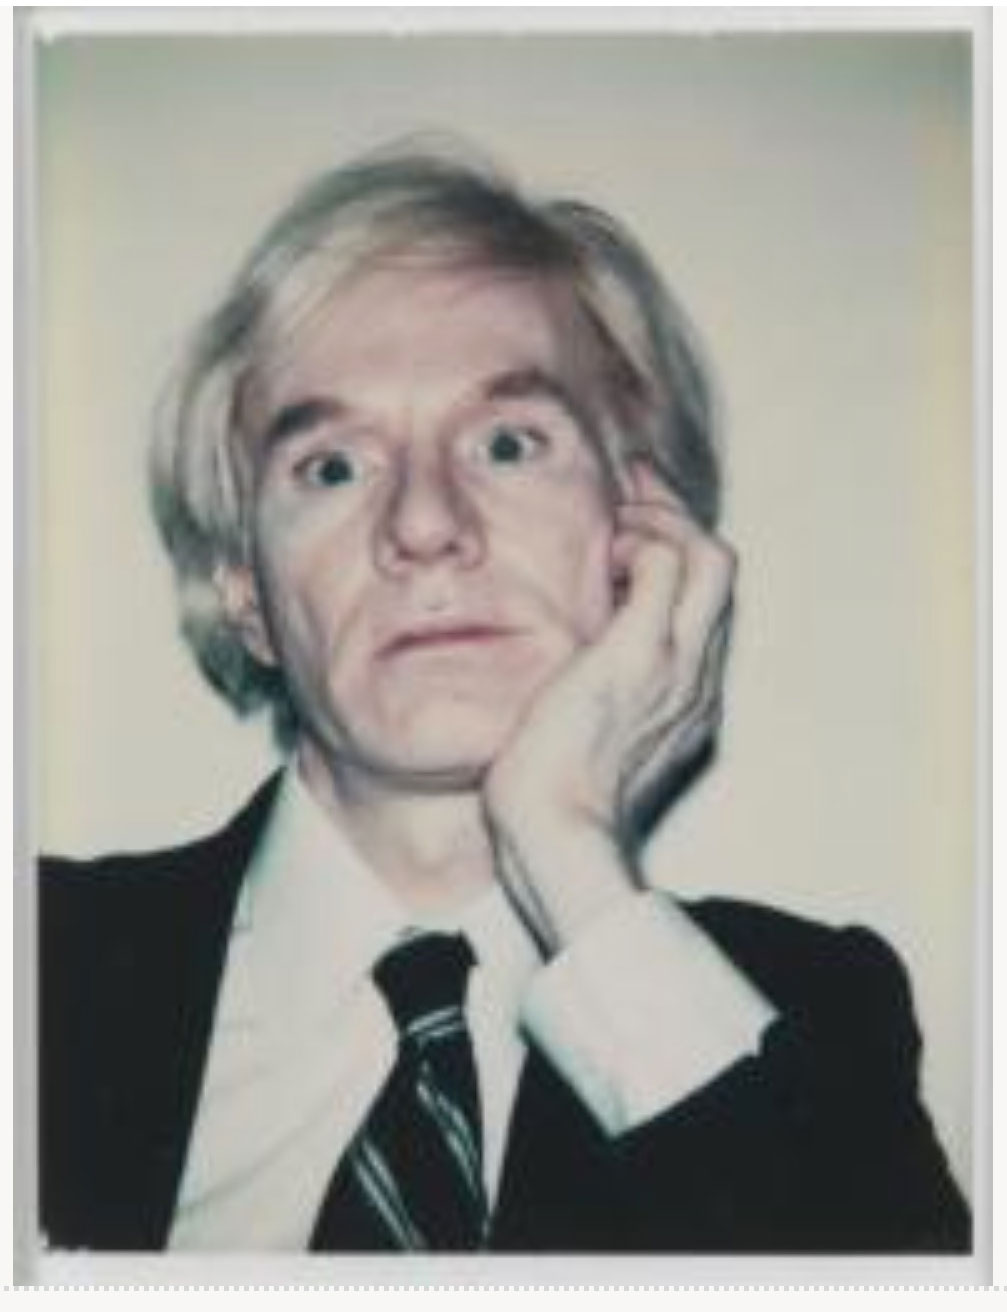 Andy Warhol Self-Portrait in Dark Suit 1977–8 © 2018 The Andy Warhol Foundation for the Visual Arts, Inc. 